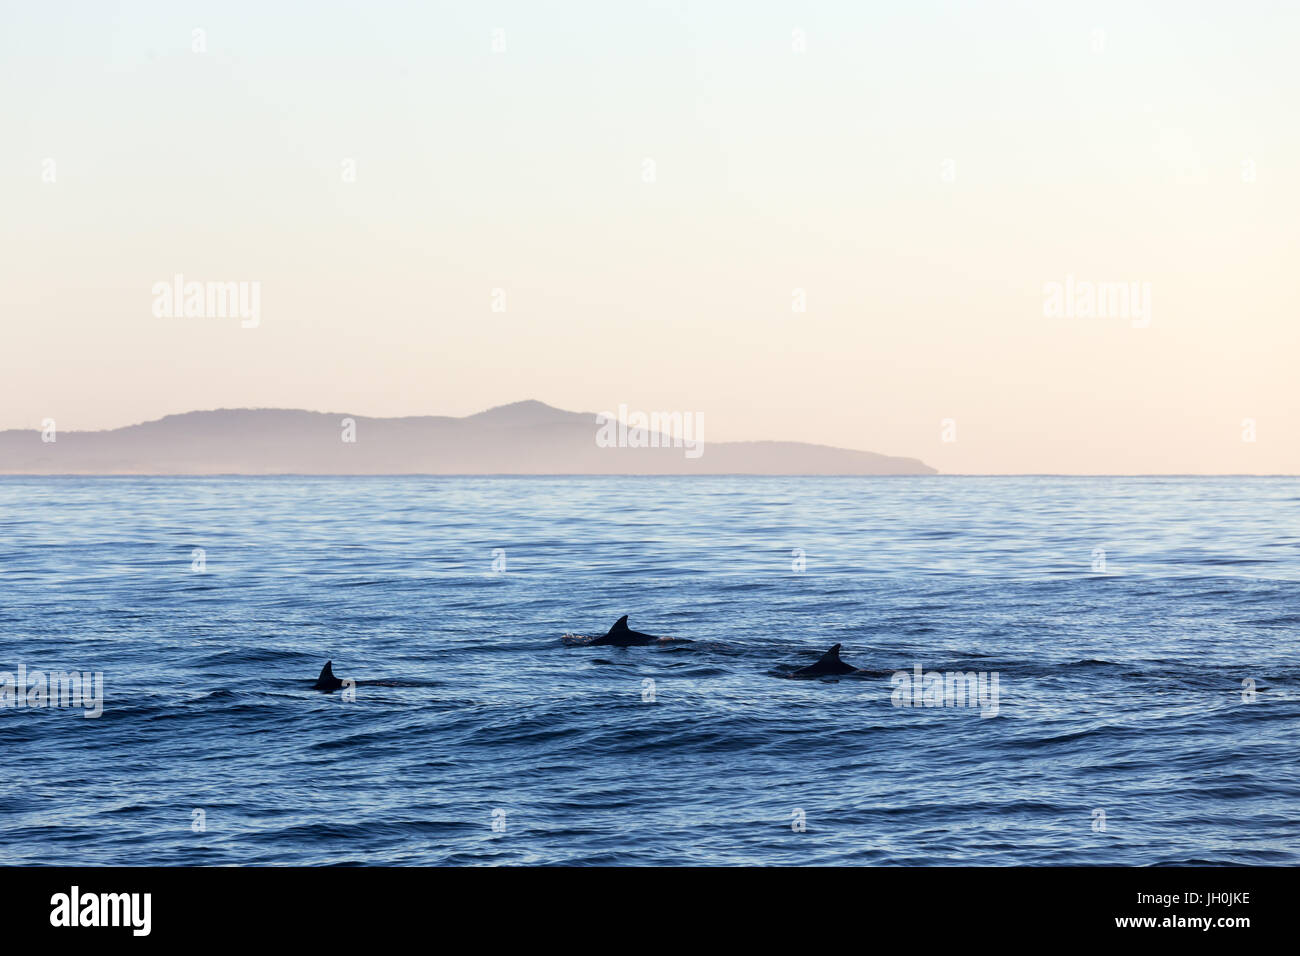 Three dolphins surface for air on a calm morning off the east coast of Australia. Stock Photo